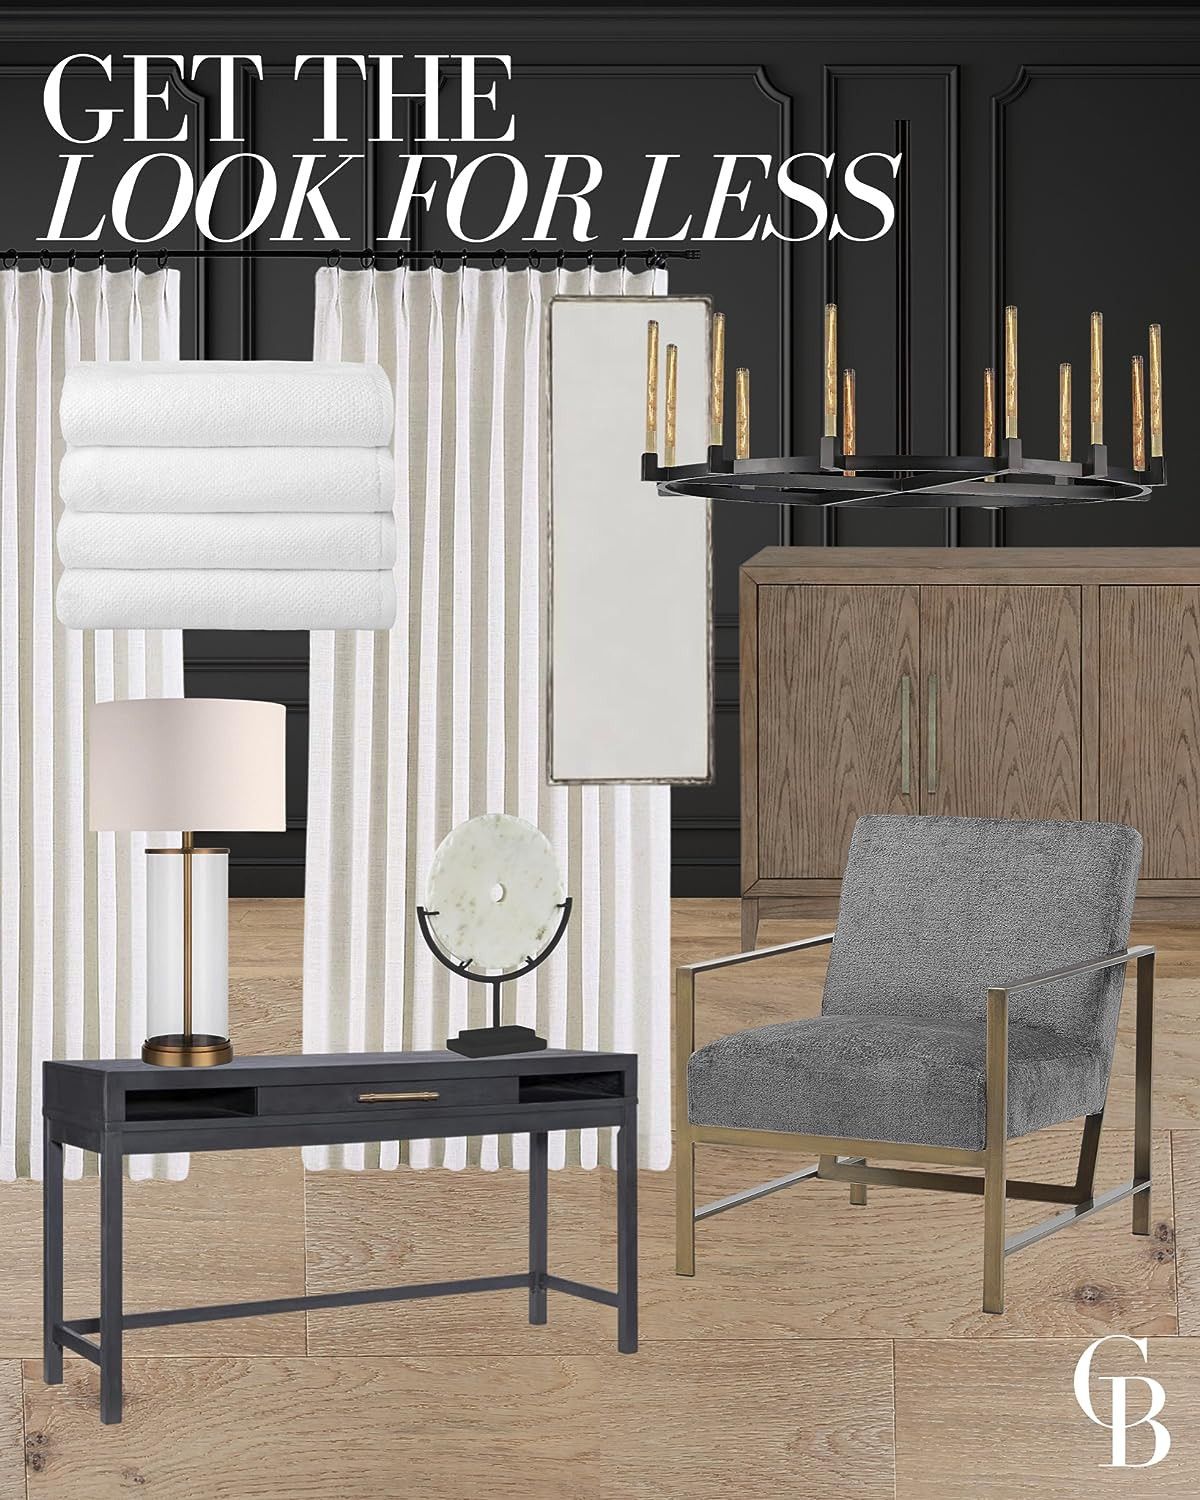 Get the look for less | Amazon (US)